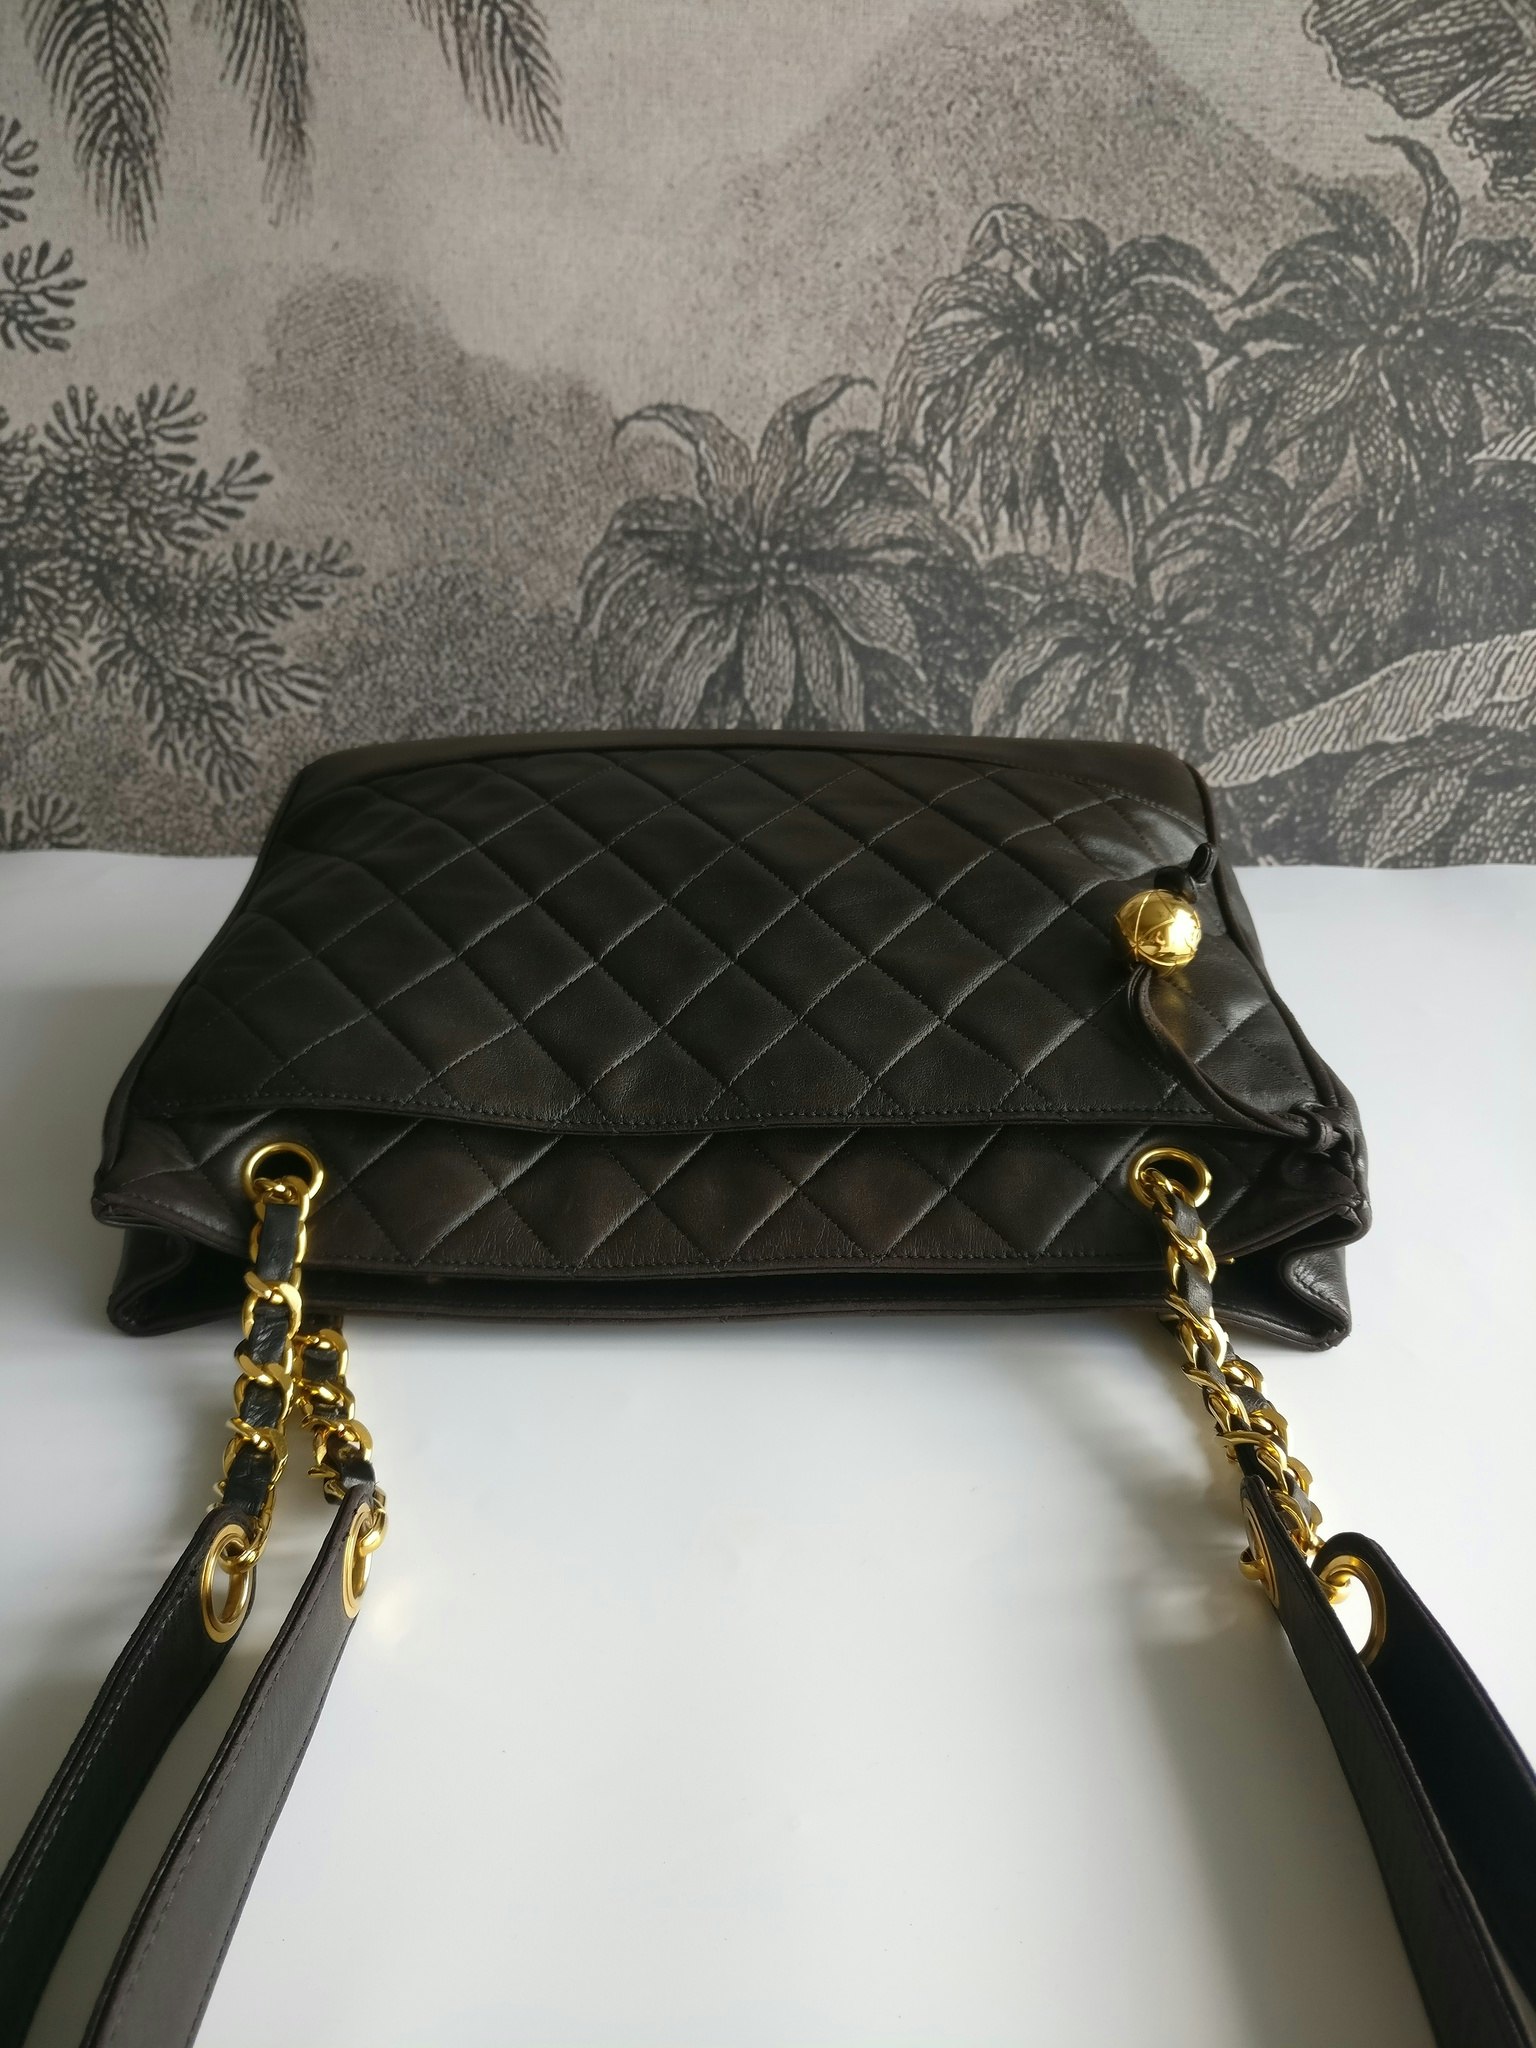 Chanel shopper quilted tote black lambskin - Good or Bag